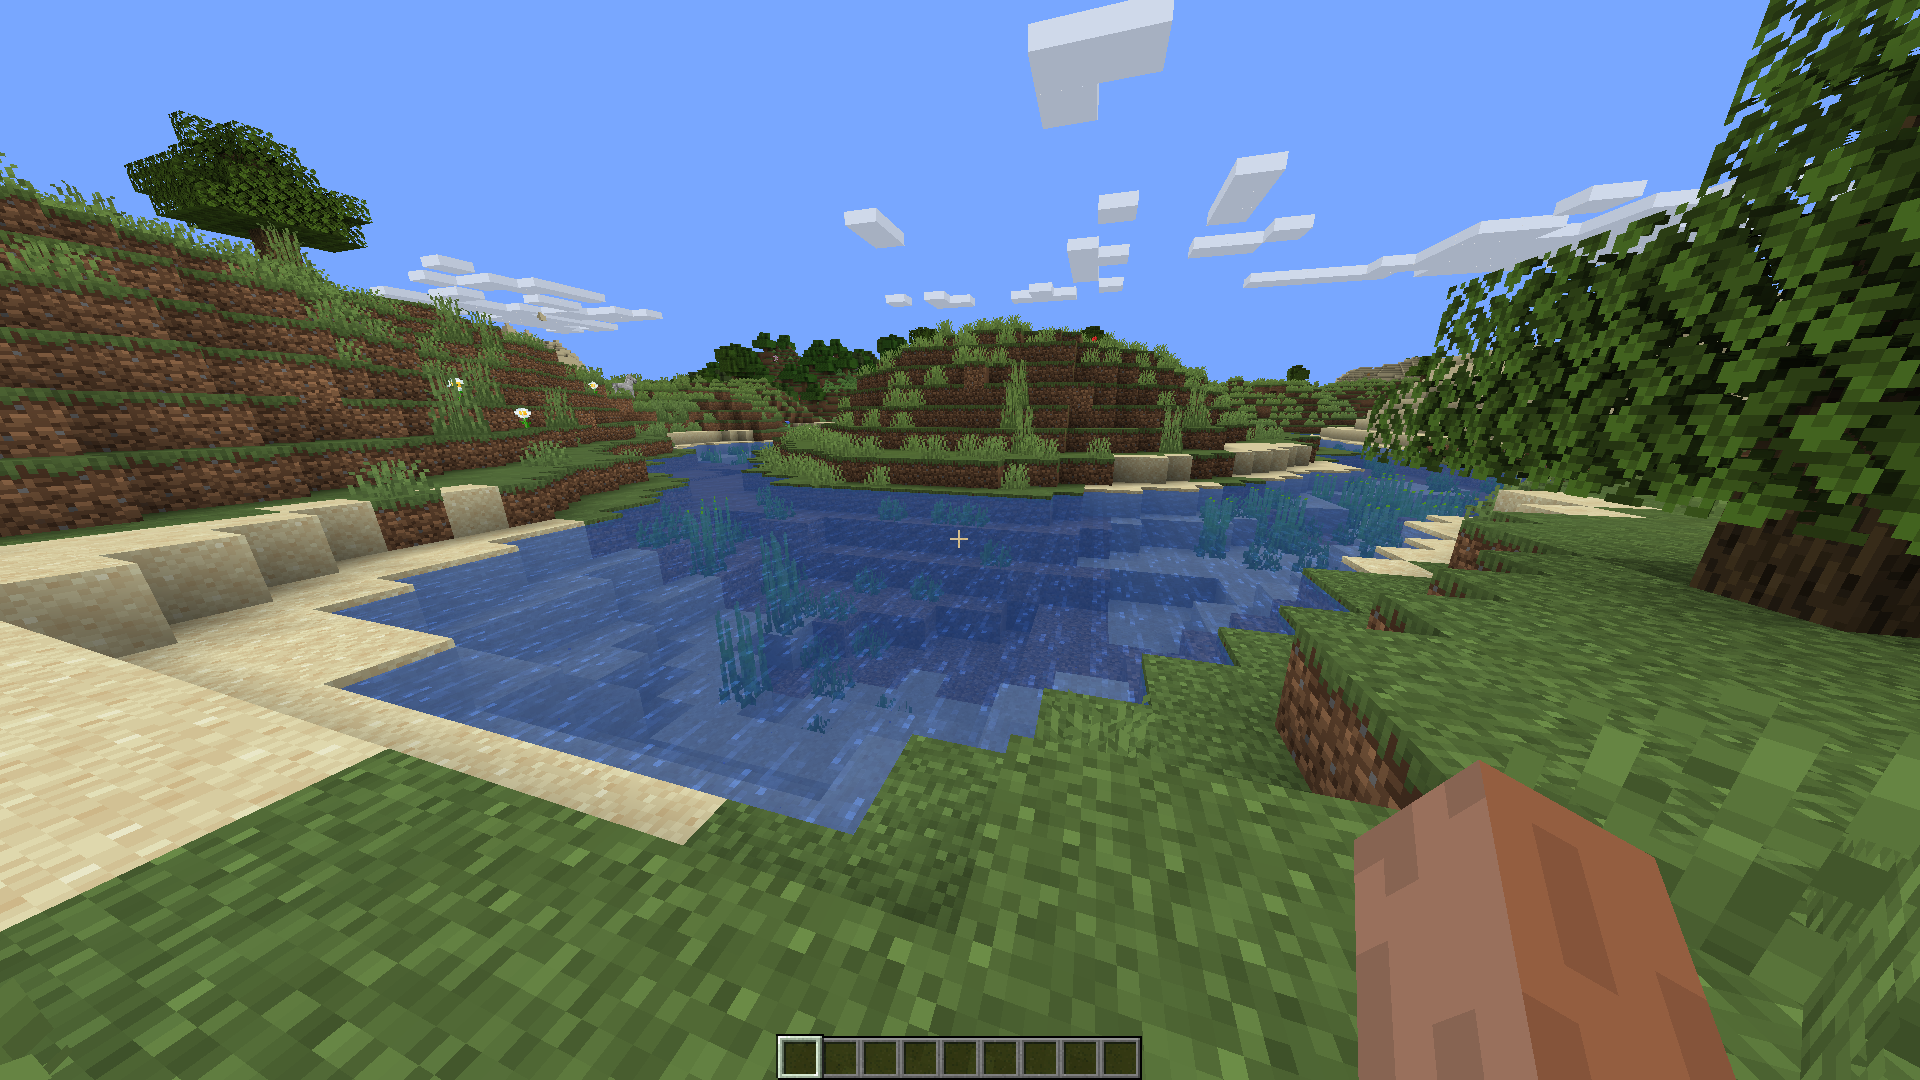 minecraft 1.12 shaders with moving water